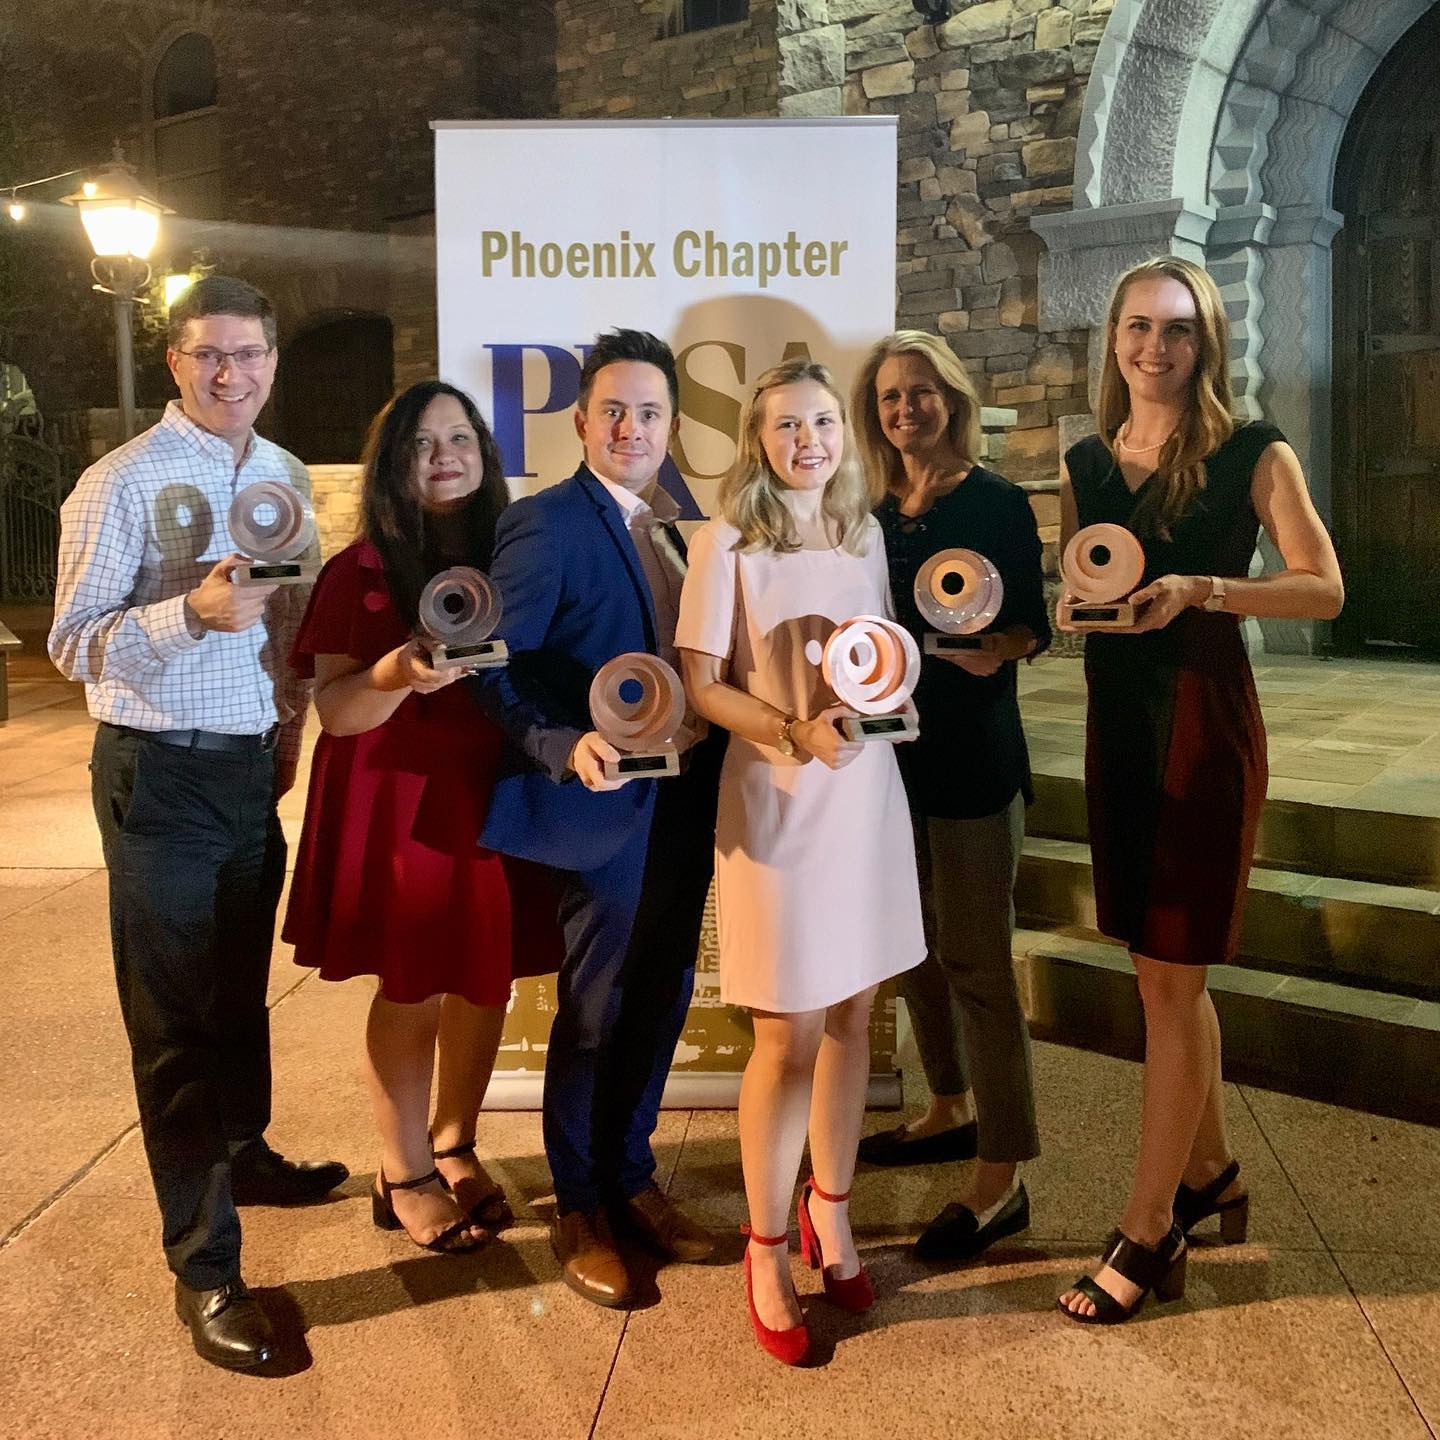 10 to 1 PR - Agency of the Year